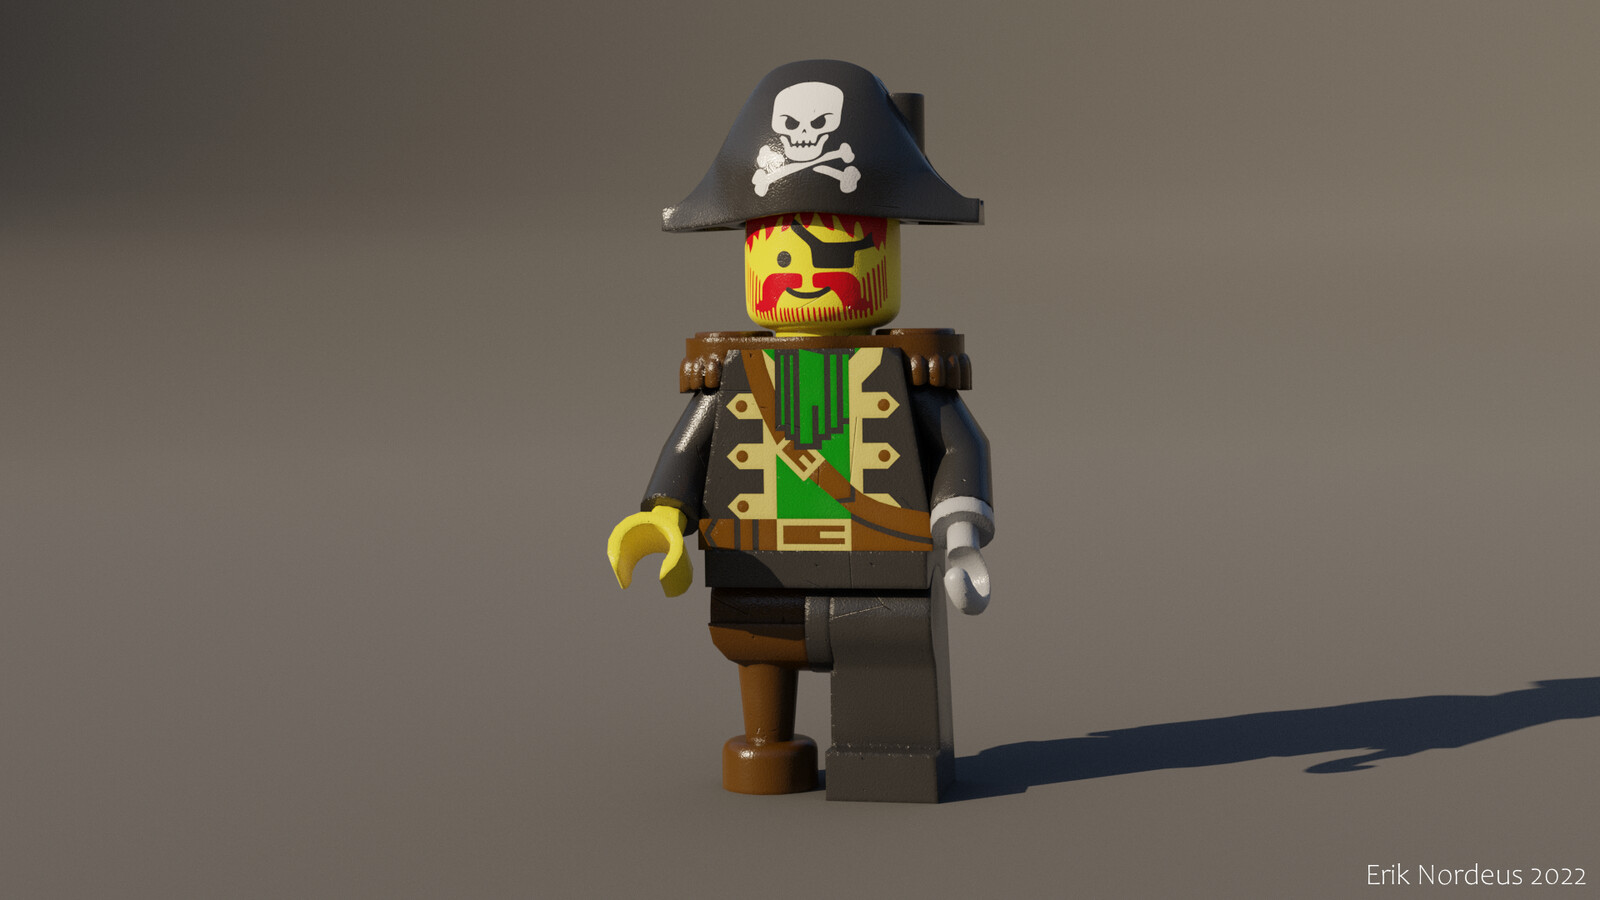 Experiment to make a realistic LEGO pirate character in Blender. You can download the material here: https://habrador.itch.io/blender-lego-material